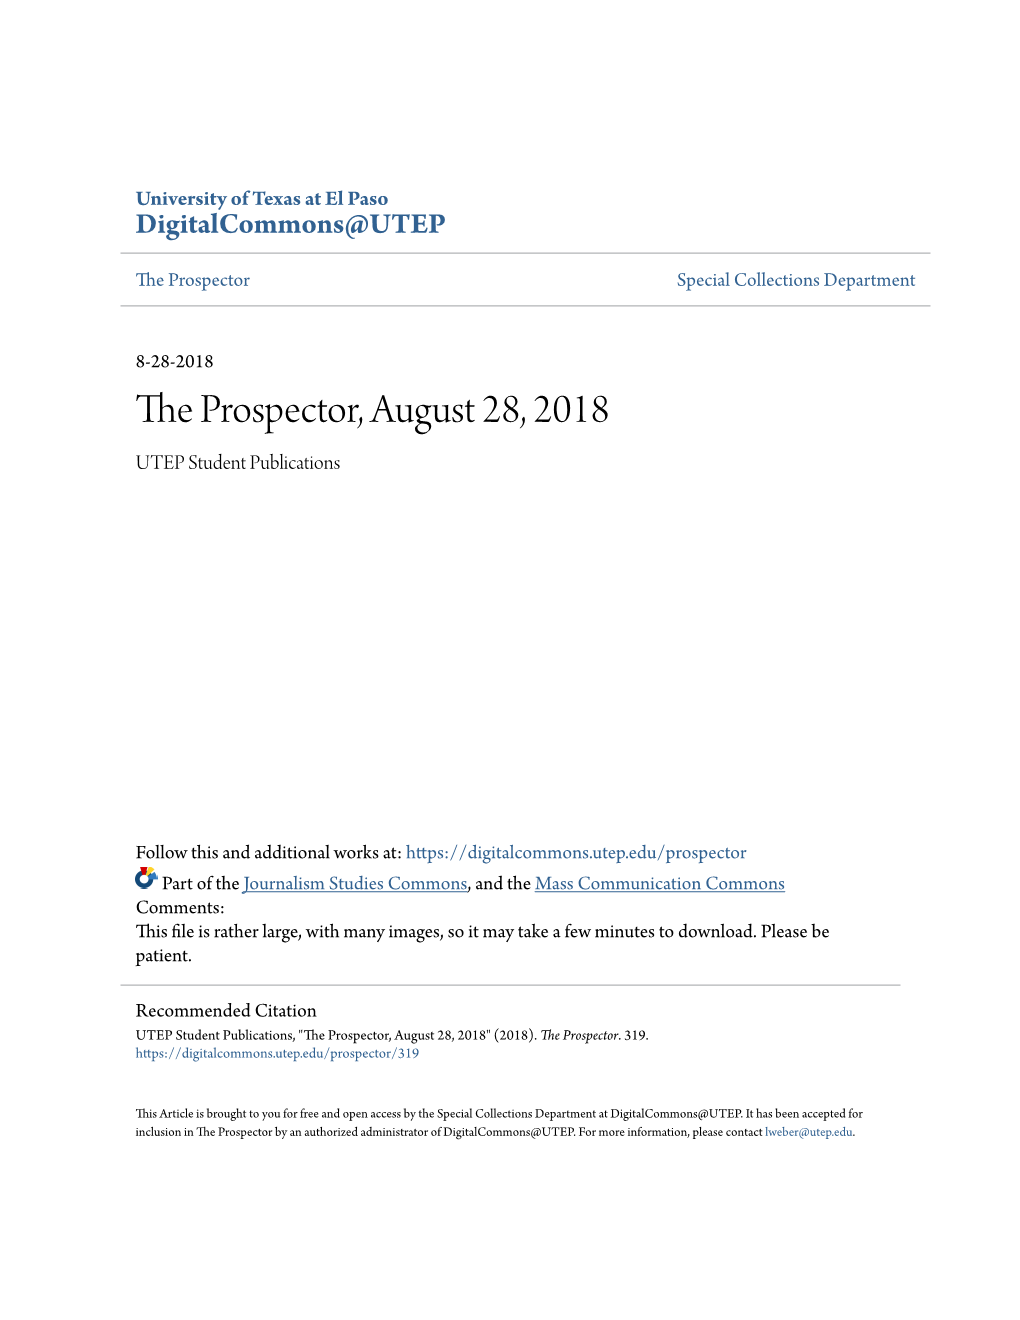 The Prospector, August 28, 2018